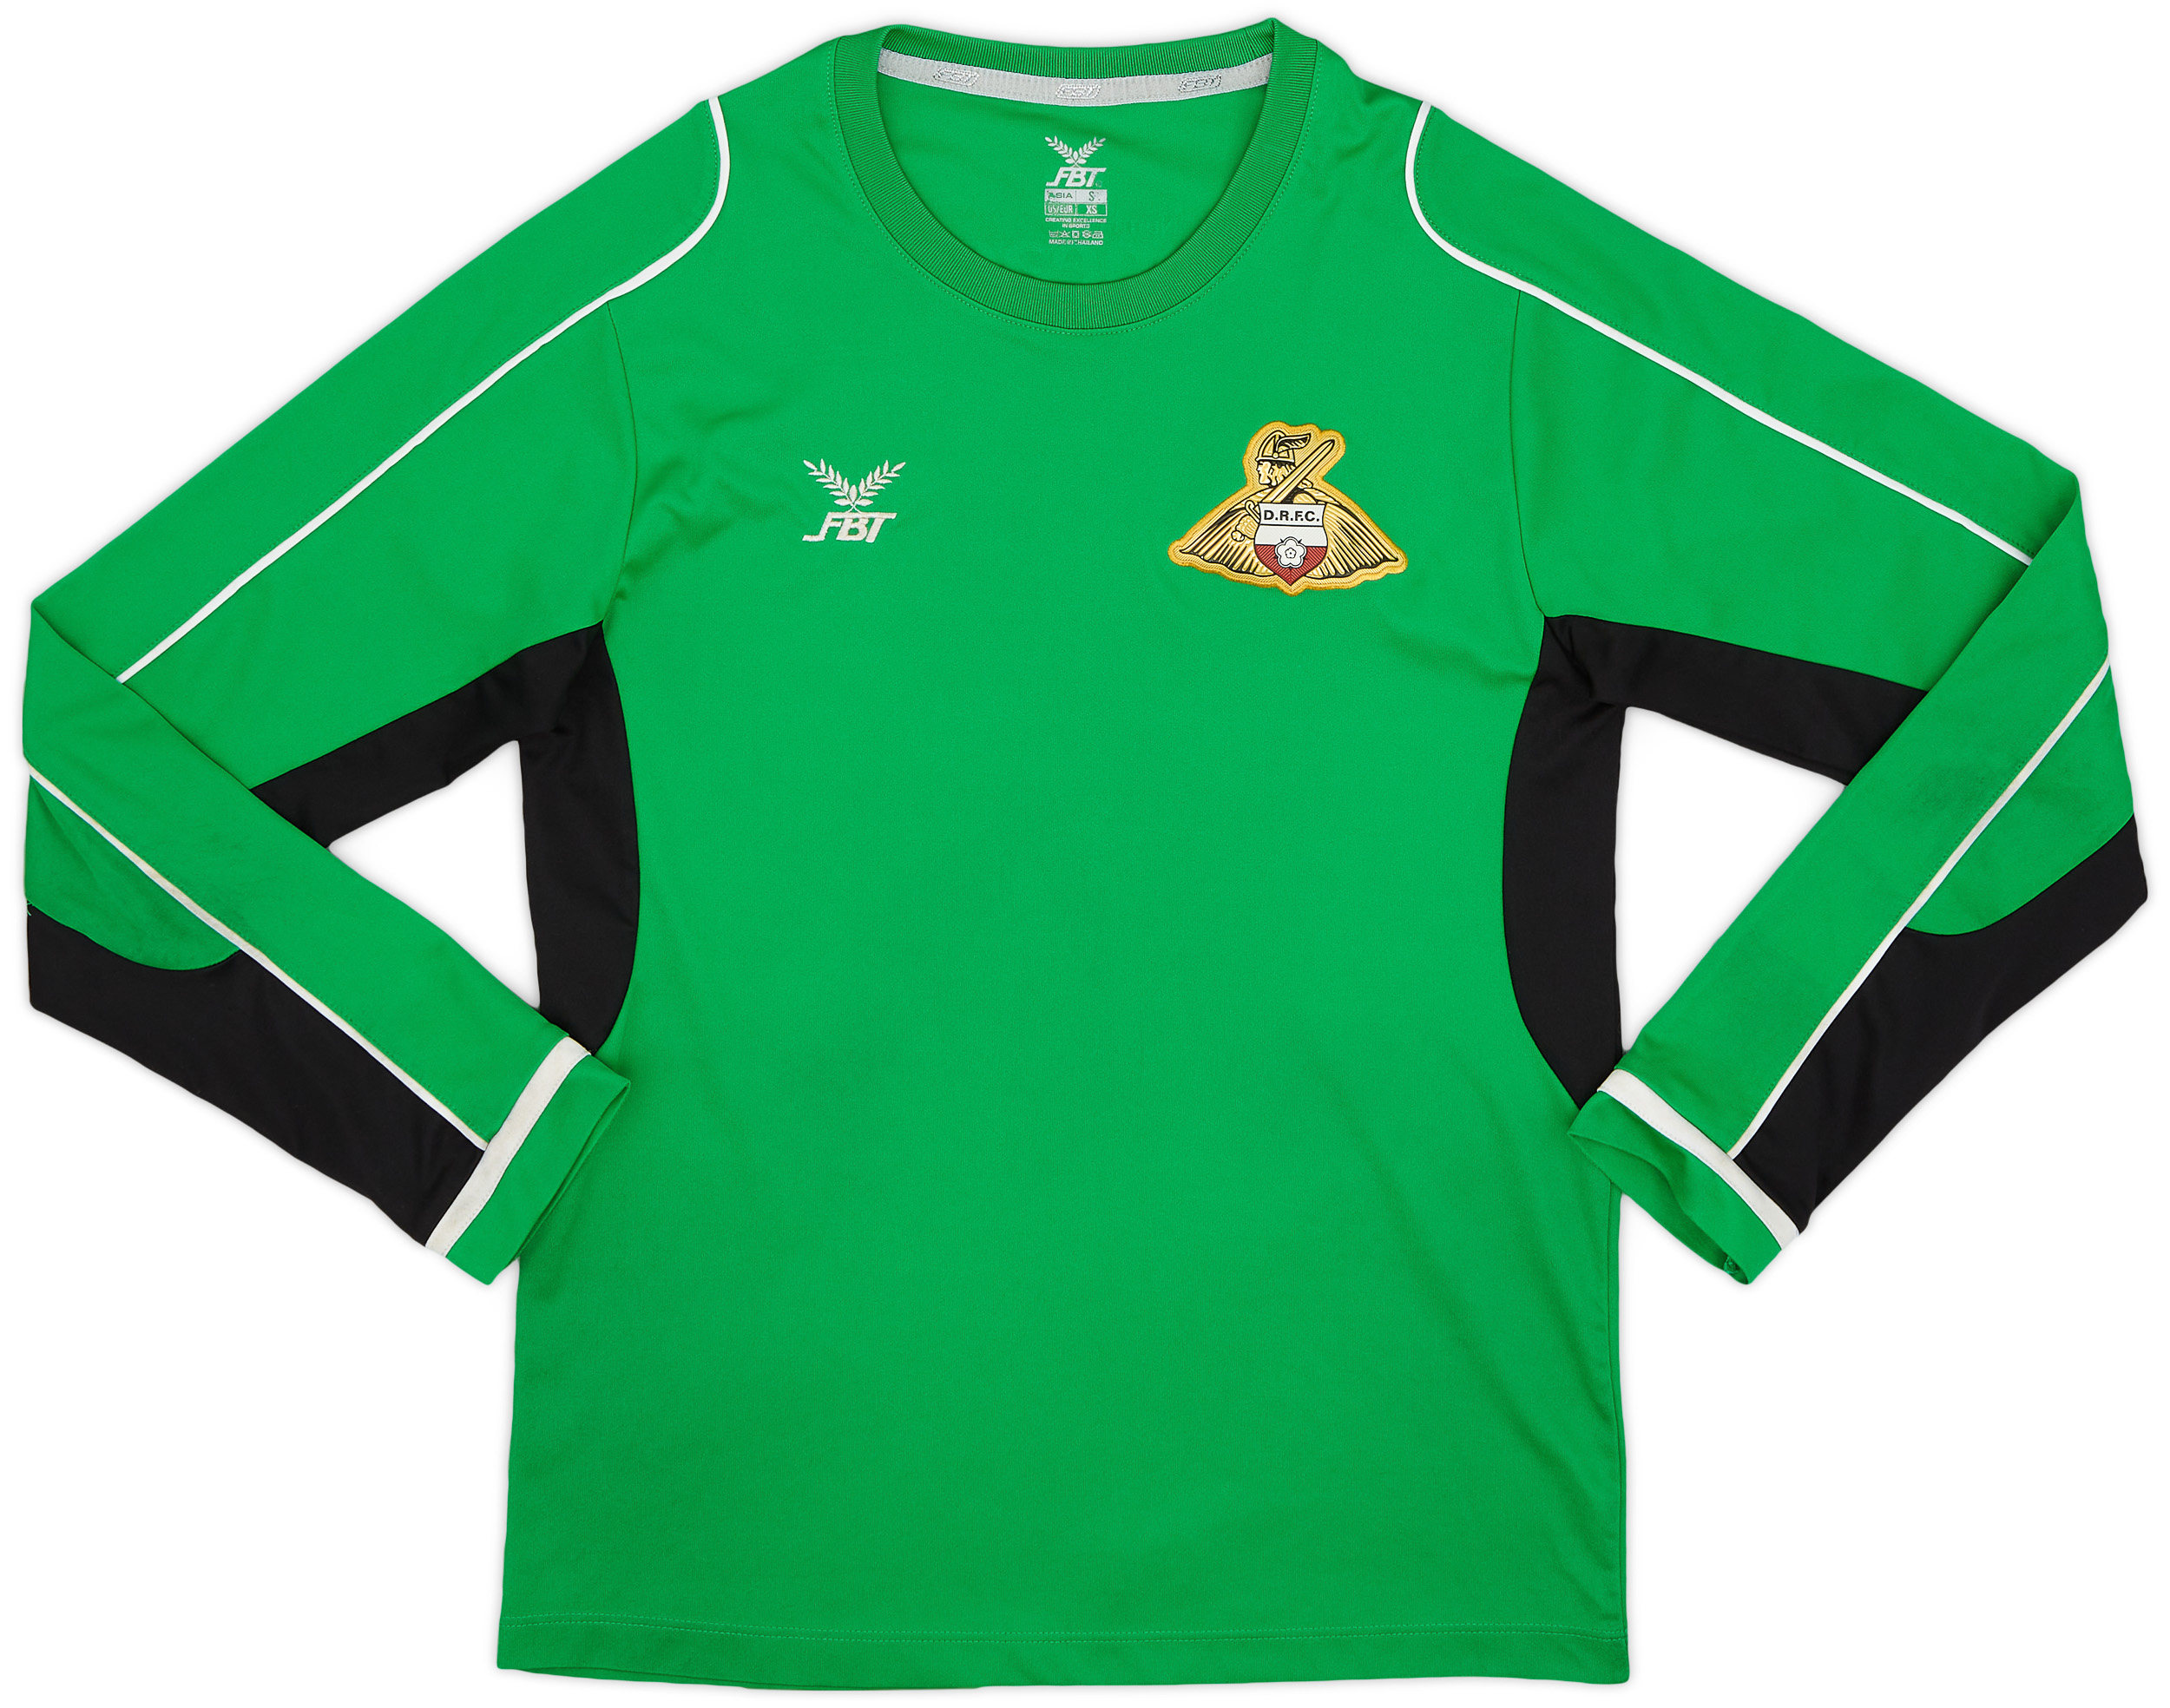 2017-18 Doncaster Rovers GK Shirt - 8/10 - ()